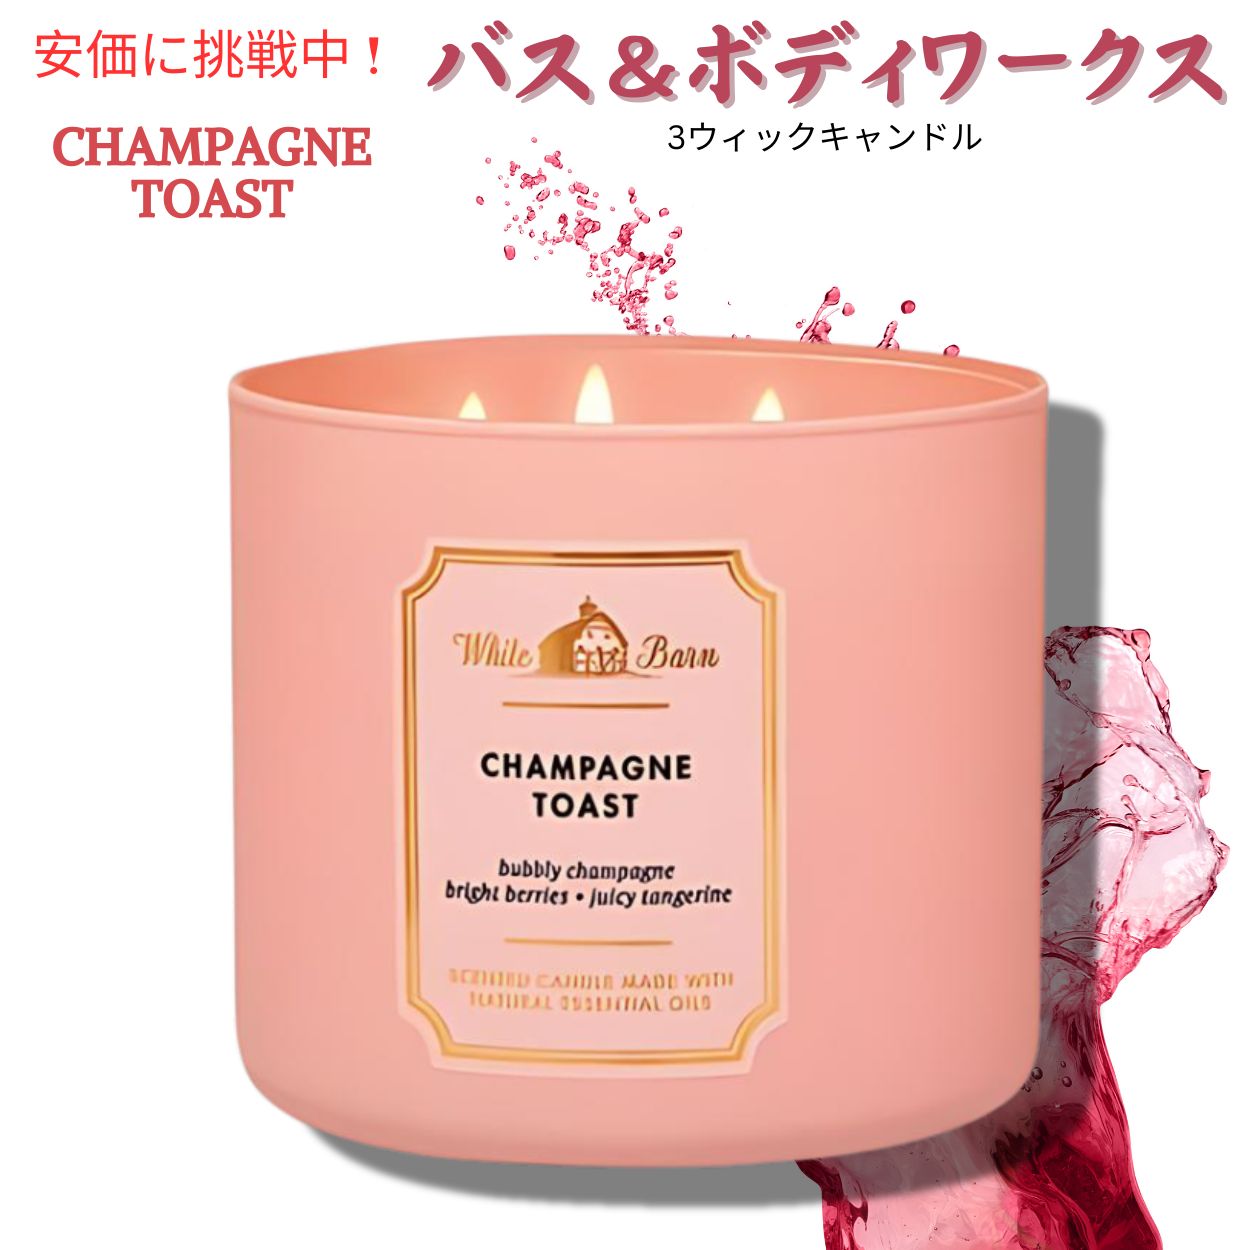 yzoXAh{fB[NX 3cLh Vpg[Xg 411g Bath and Body Works 3-Wick Candle CHAMPAGNE TOAST 411g oX&{fB